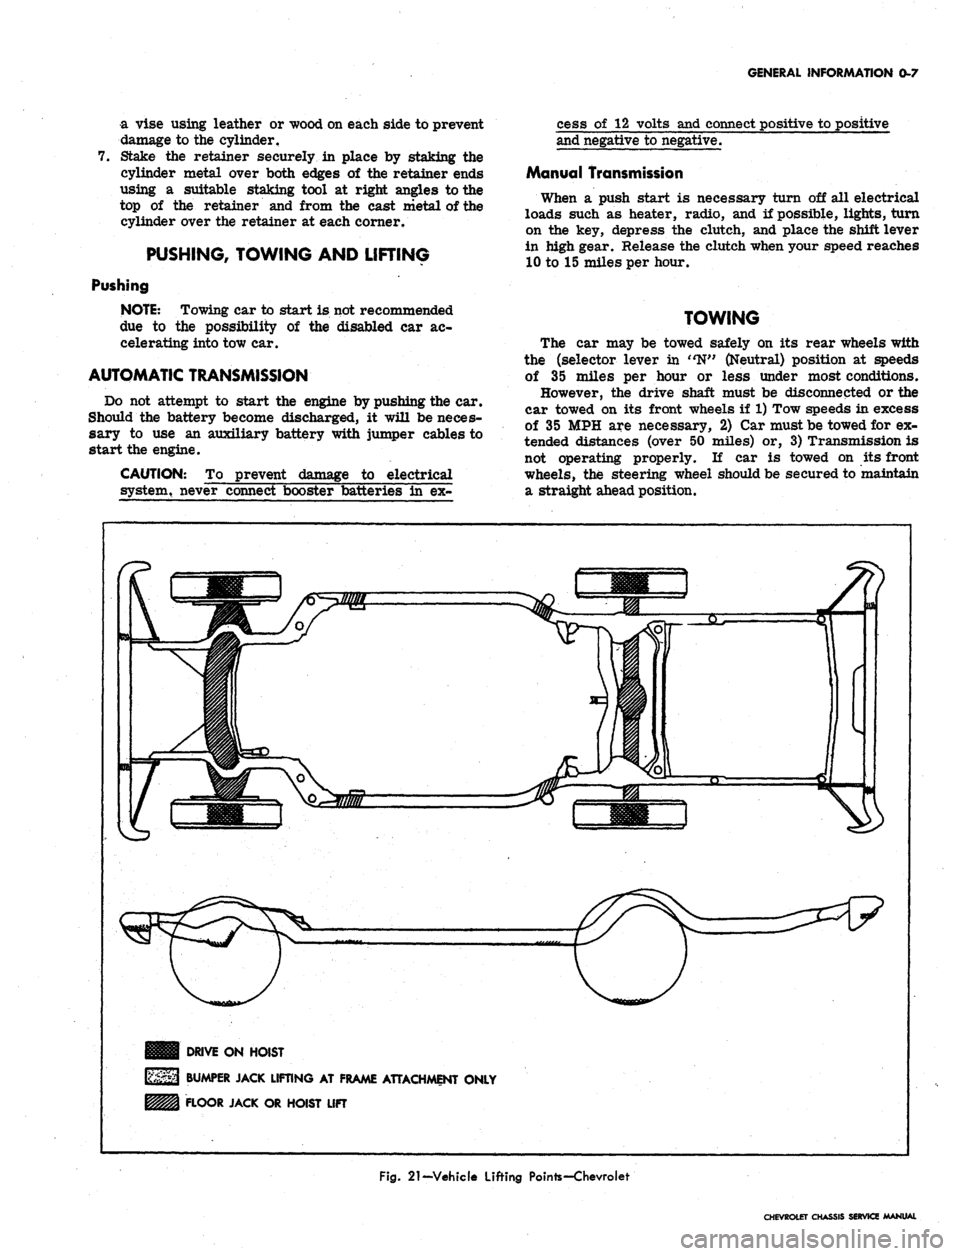 CHEVROLET CAMARO 1967 1.G Chassis Workshop Manual 
GENERAL INFORMATION 0-7

a vise using leather or wood on each side to prevent

damage to the cylinder,

7. Stake the retainer securely in place by staking the

cylinder metal over both edges of the r